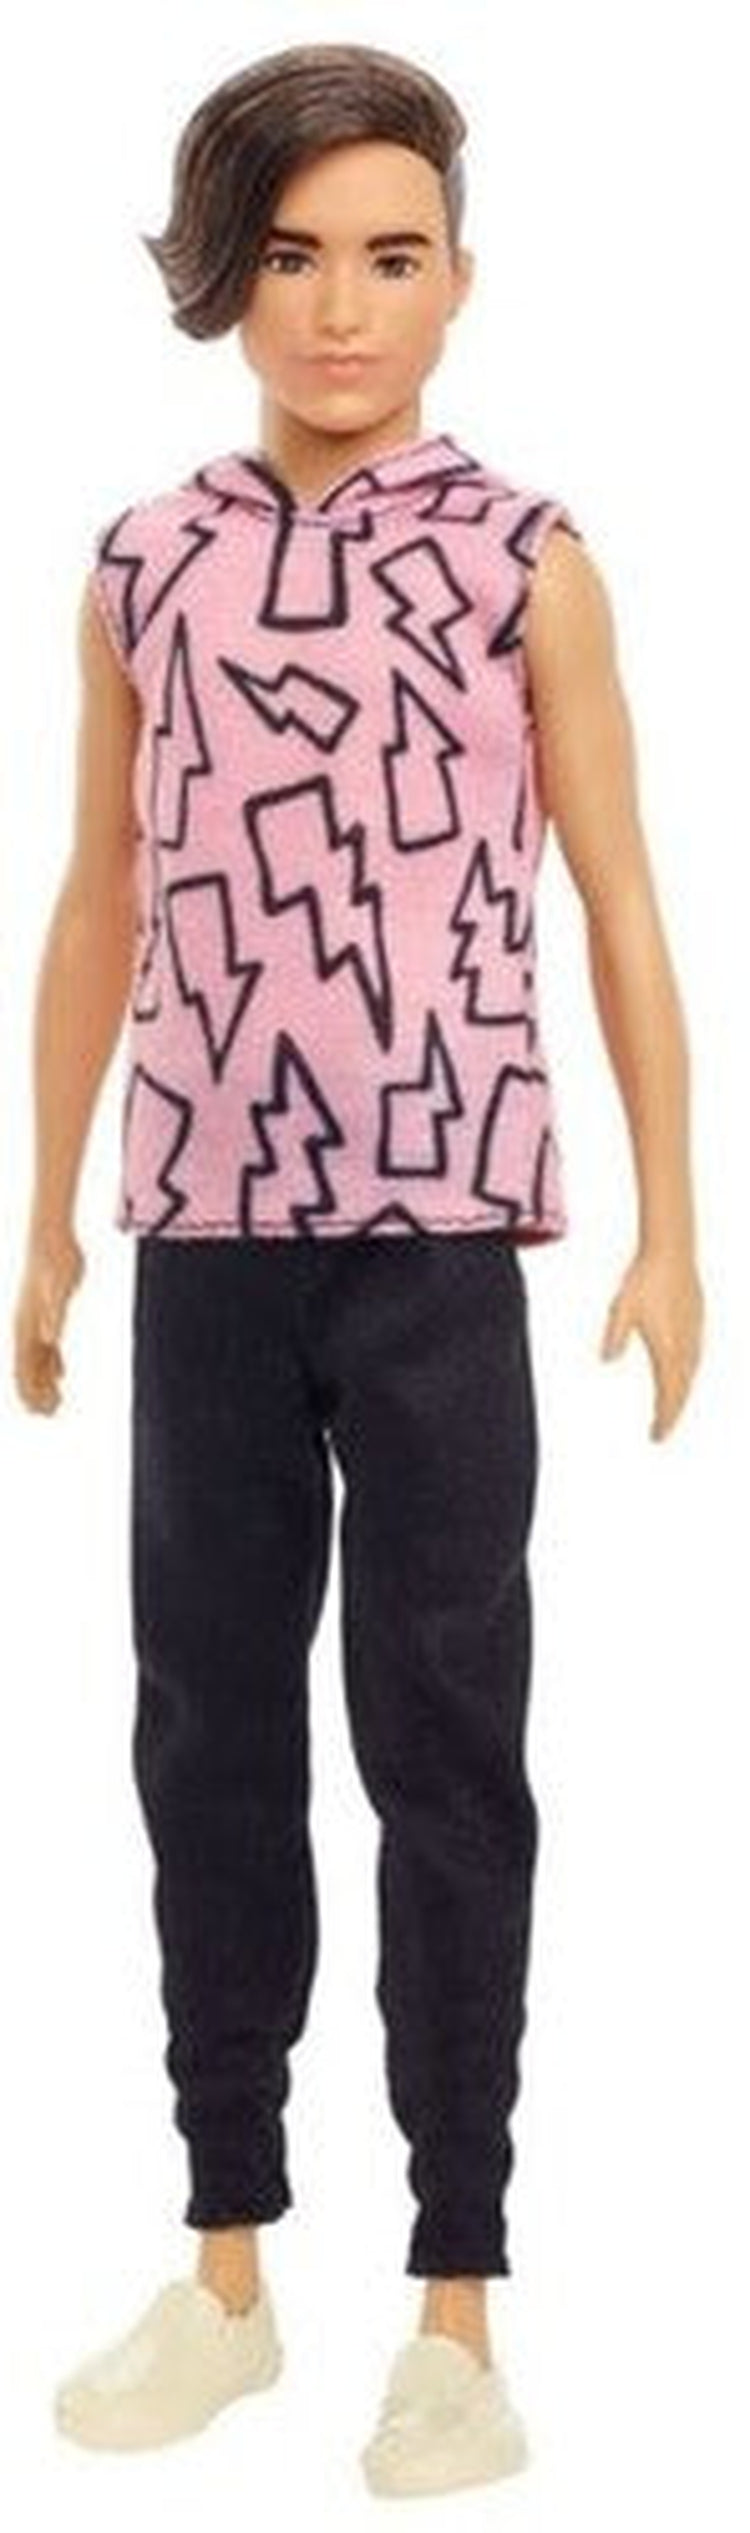 Mattel - Barbie Ken Fashionista Doll, Pink Hoodies with Lightening Bolts, Black Pants, White Shoes and Short Brown Hair